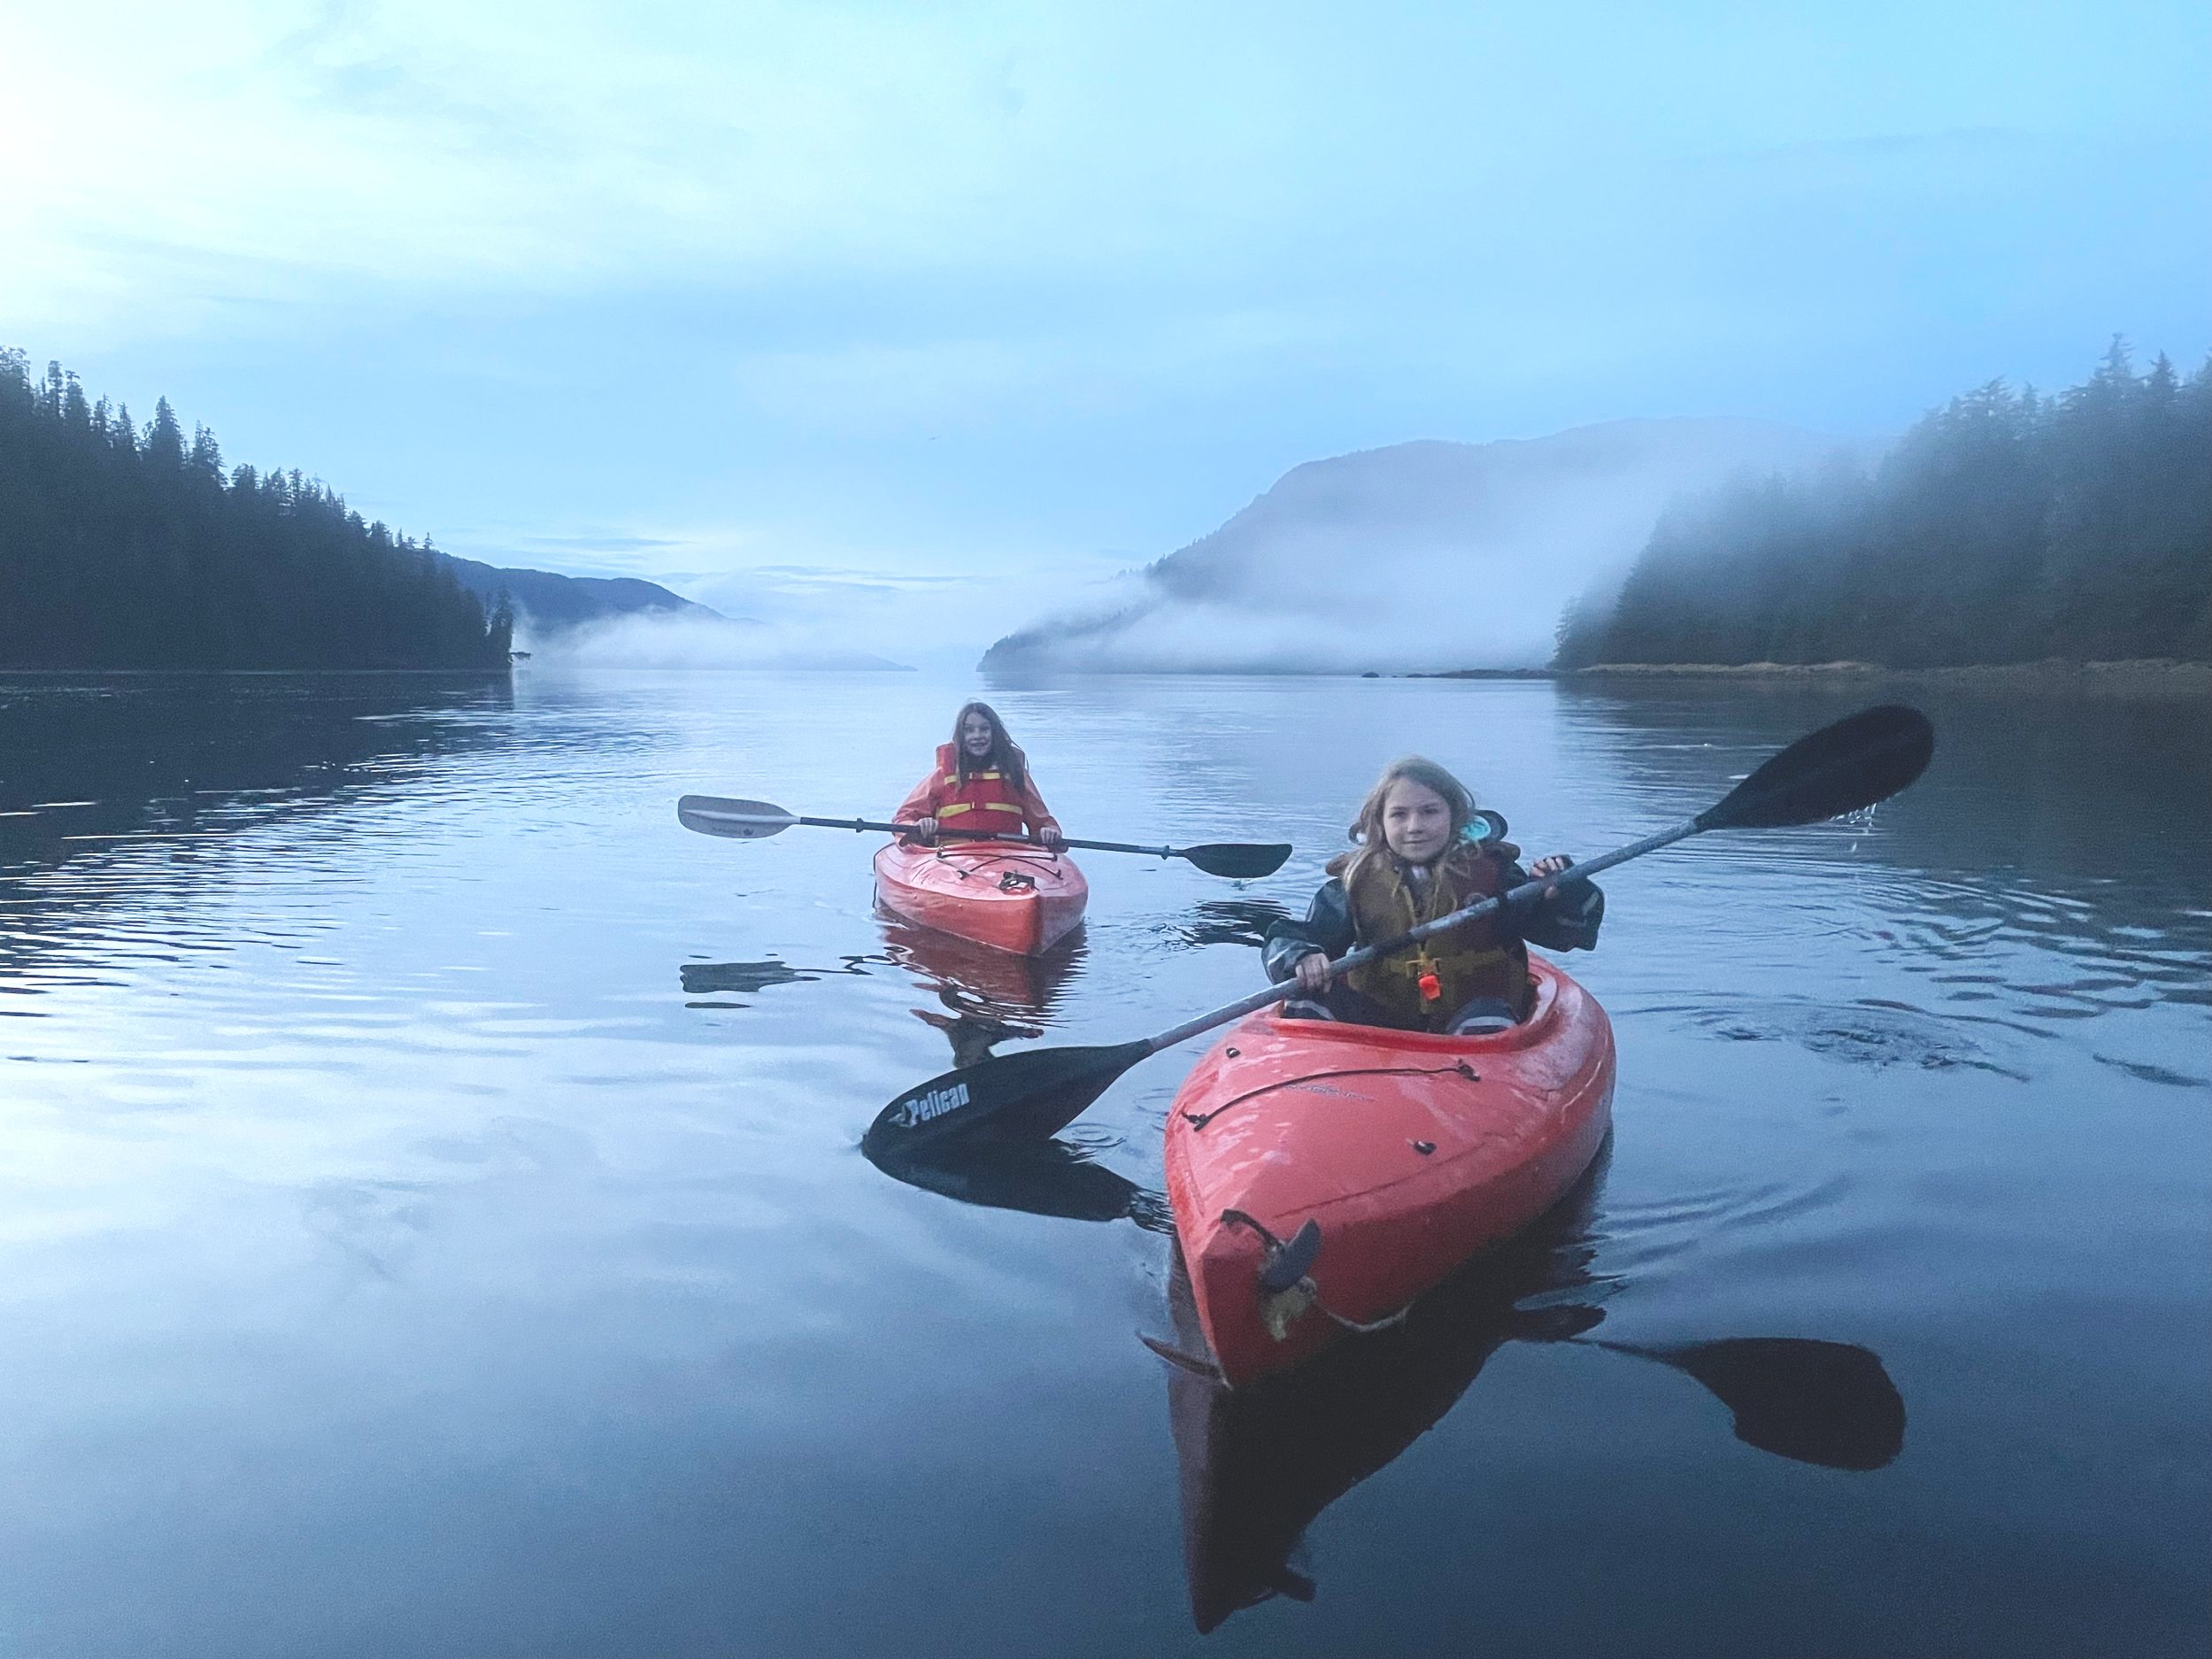 Two young girls kayaking in red kayaks at dusk.  Low clouds and mist covering hills and trees in the background.